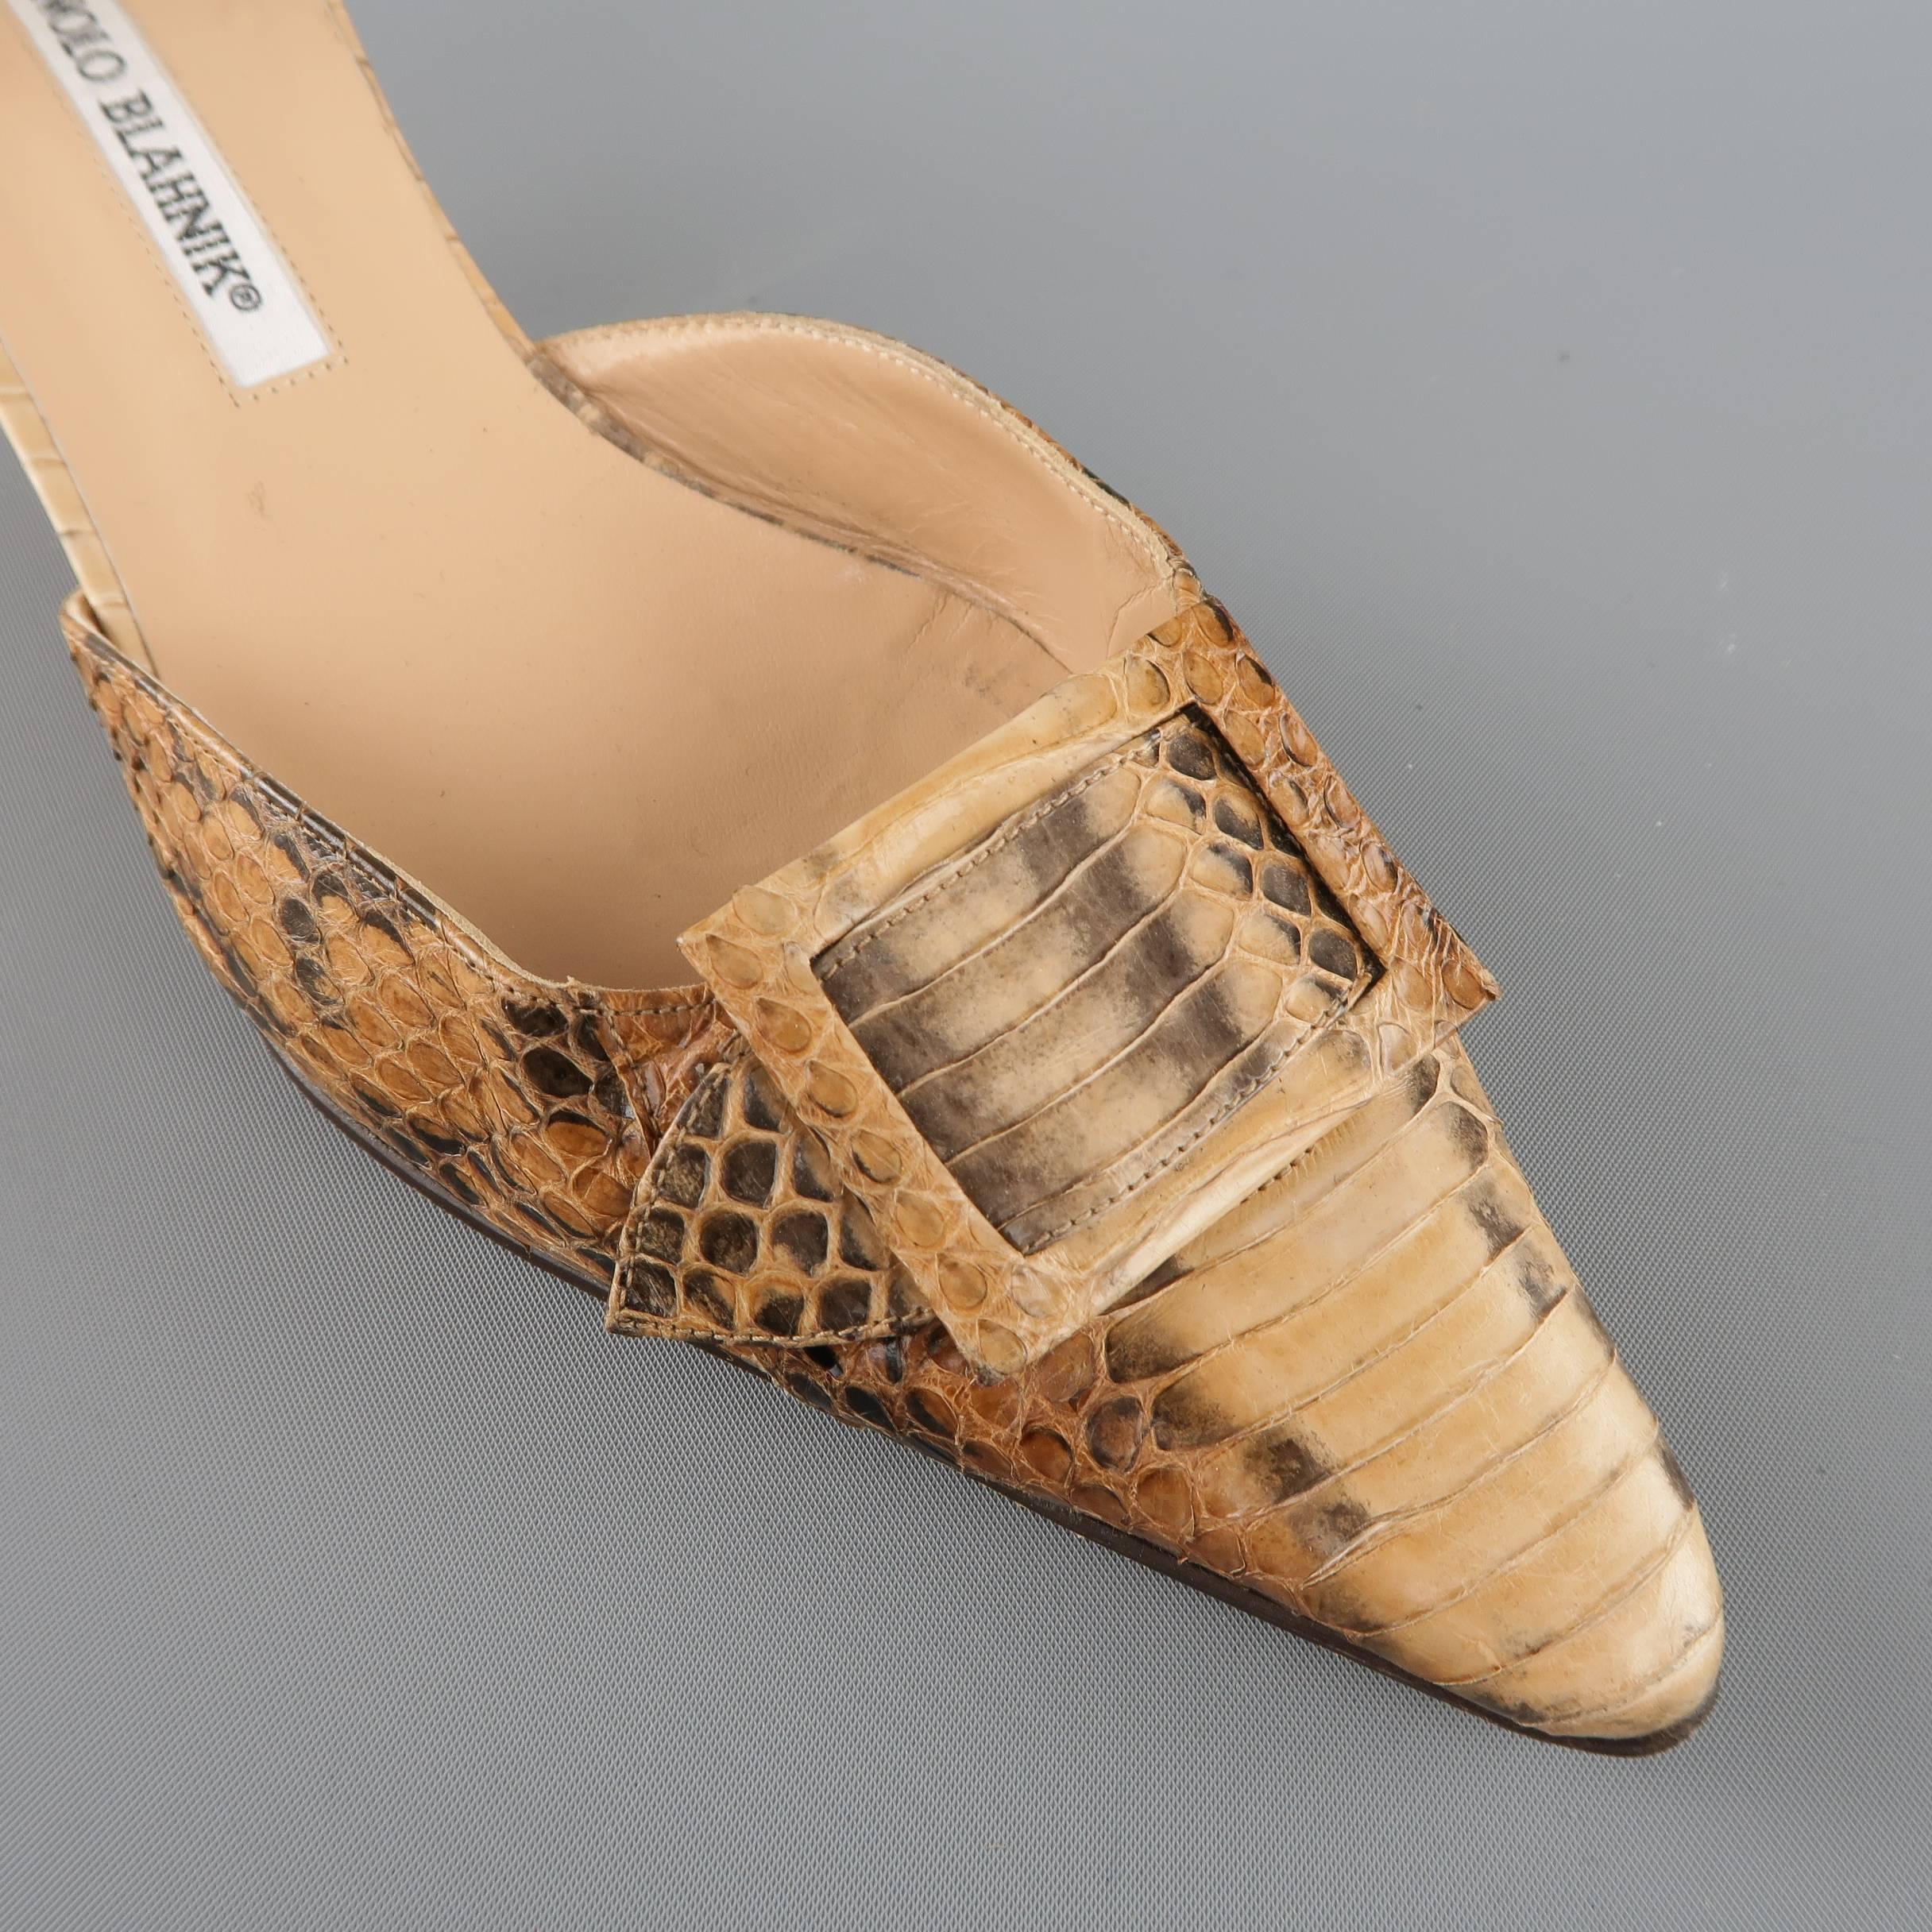 MANOLO BLAHNIK Tonodo d'orsay pumps come in tan snakeskin and feature a pointed toe, covered buckle strap detail, and covered kitten heel. With box. Made in Italy.
 
Good Pre-Owned Condition.
Marked: IT 3
 
Heel: 2 in.


SKU: 84453